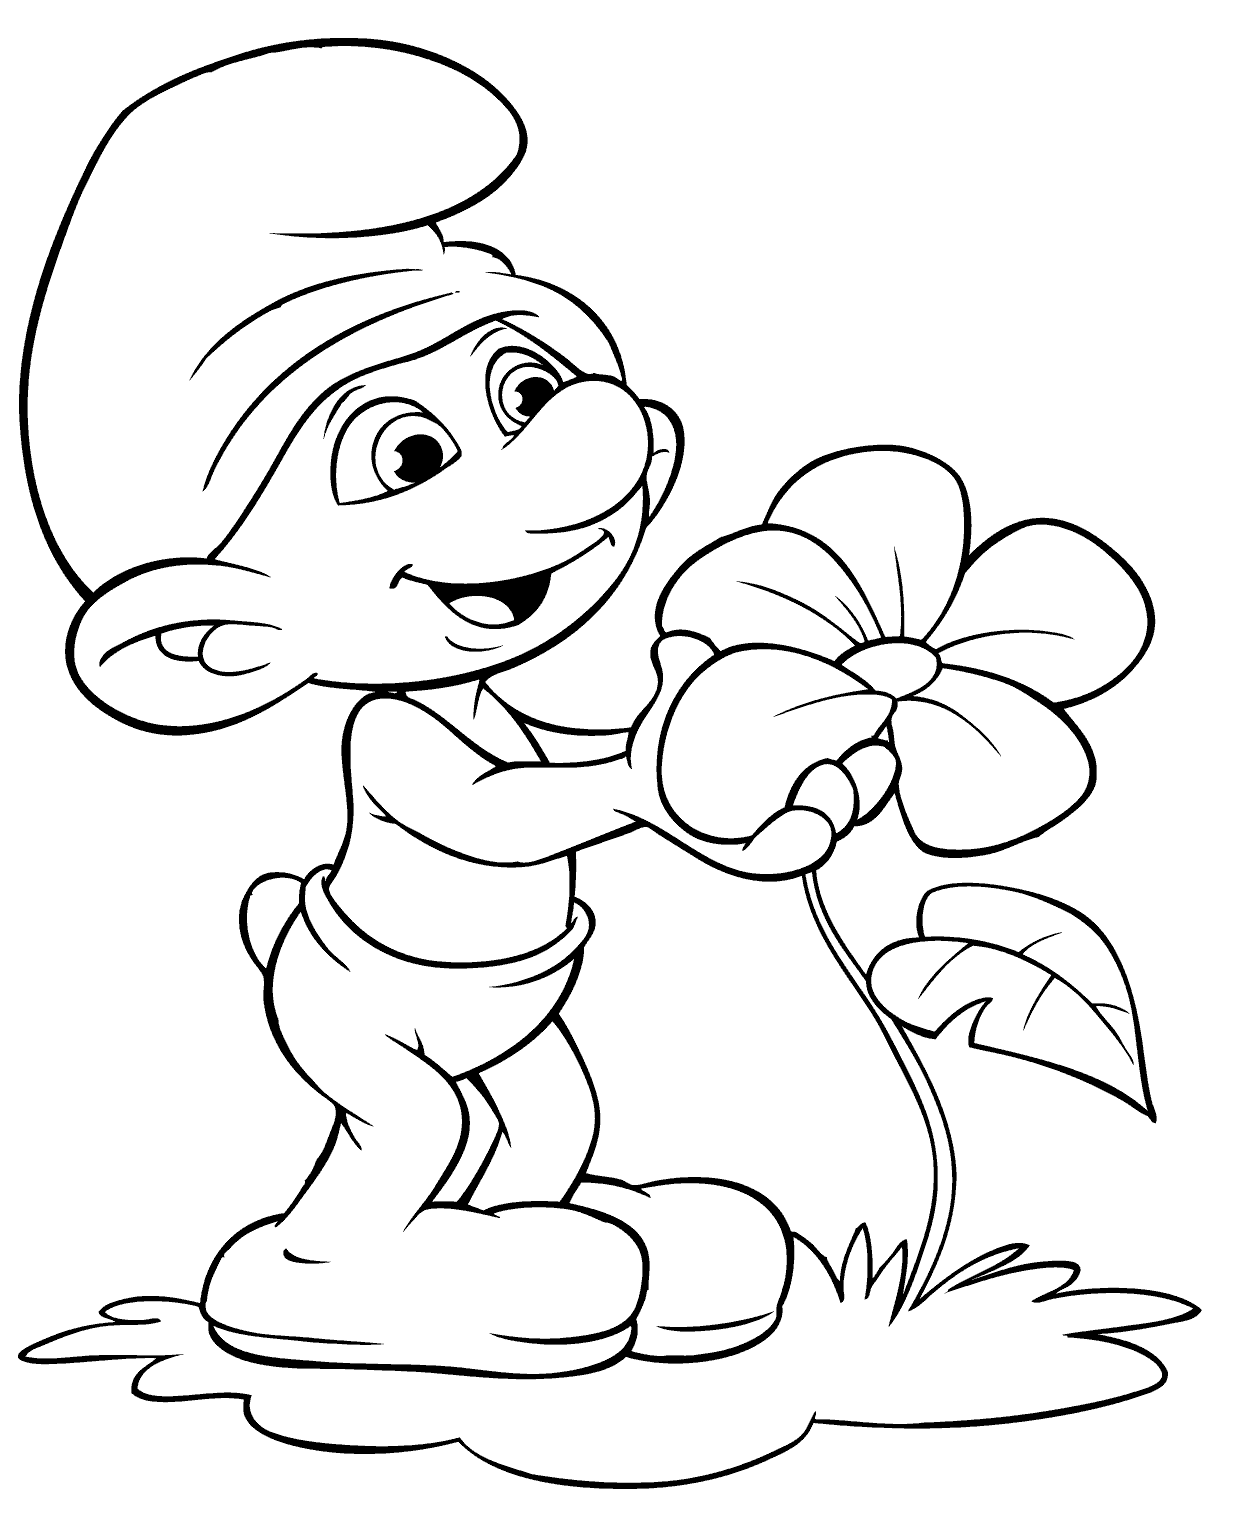 The Smurfs Coloring Pages TV Film Smurf Sheets Printable 2020 09702 Coloring4free